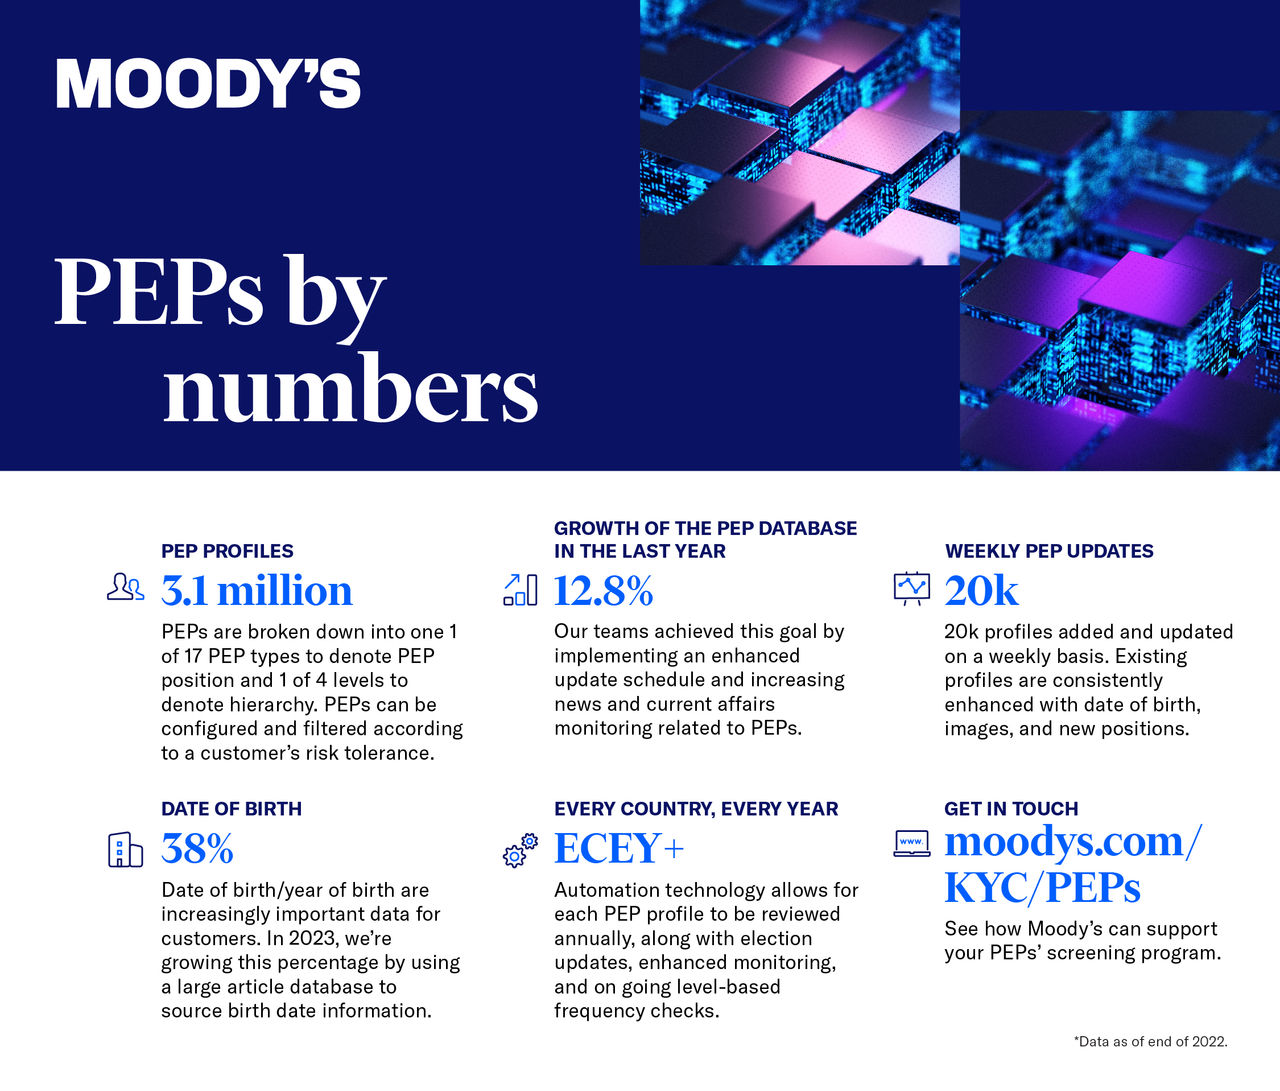 Infographic showing Moody's PEPs data by numbers